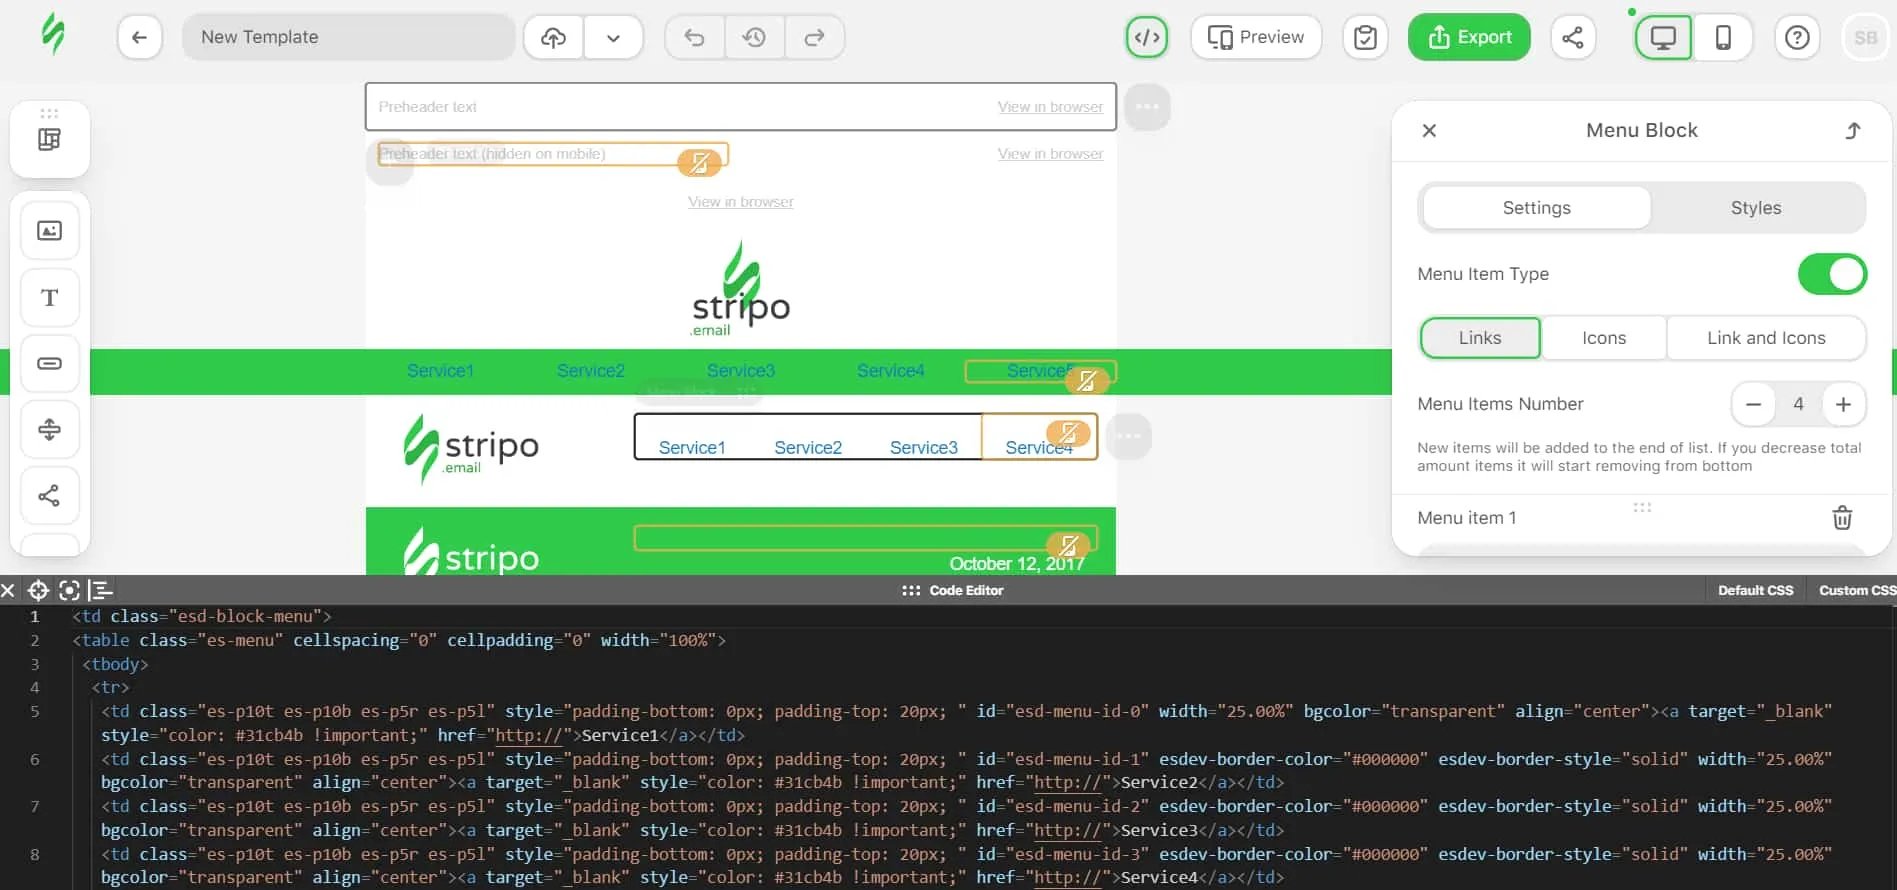 bulk emailing software, Stripo’s drag-and-drop email builder and HTML code editor